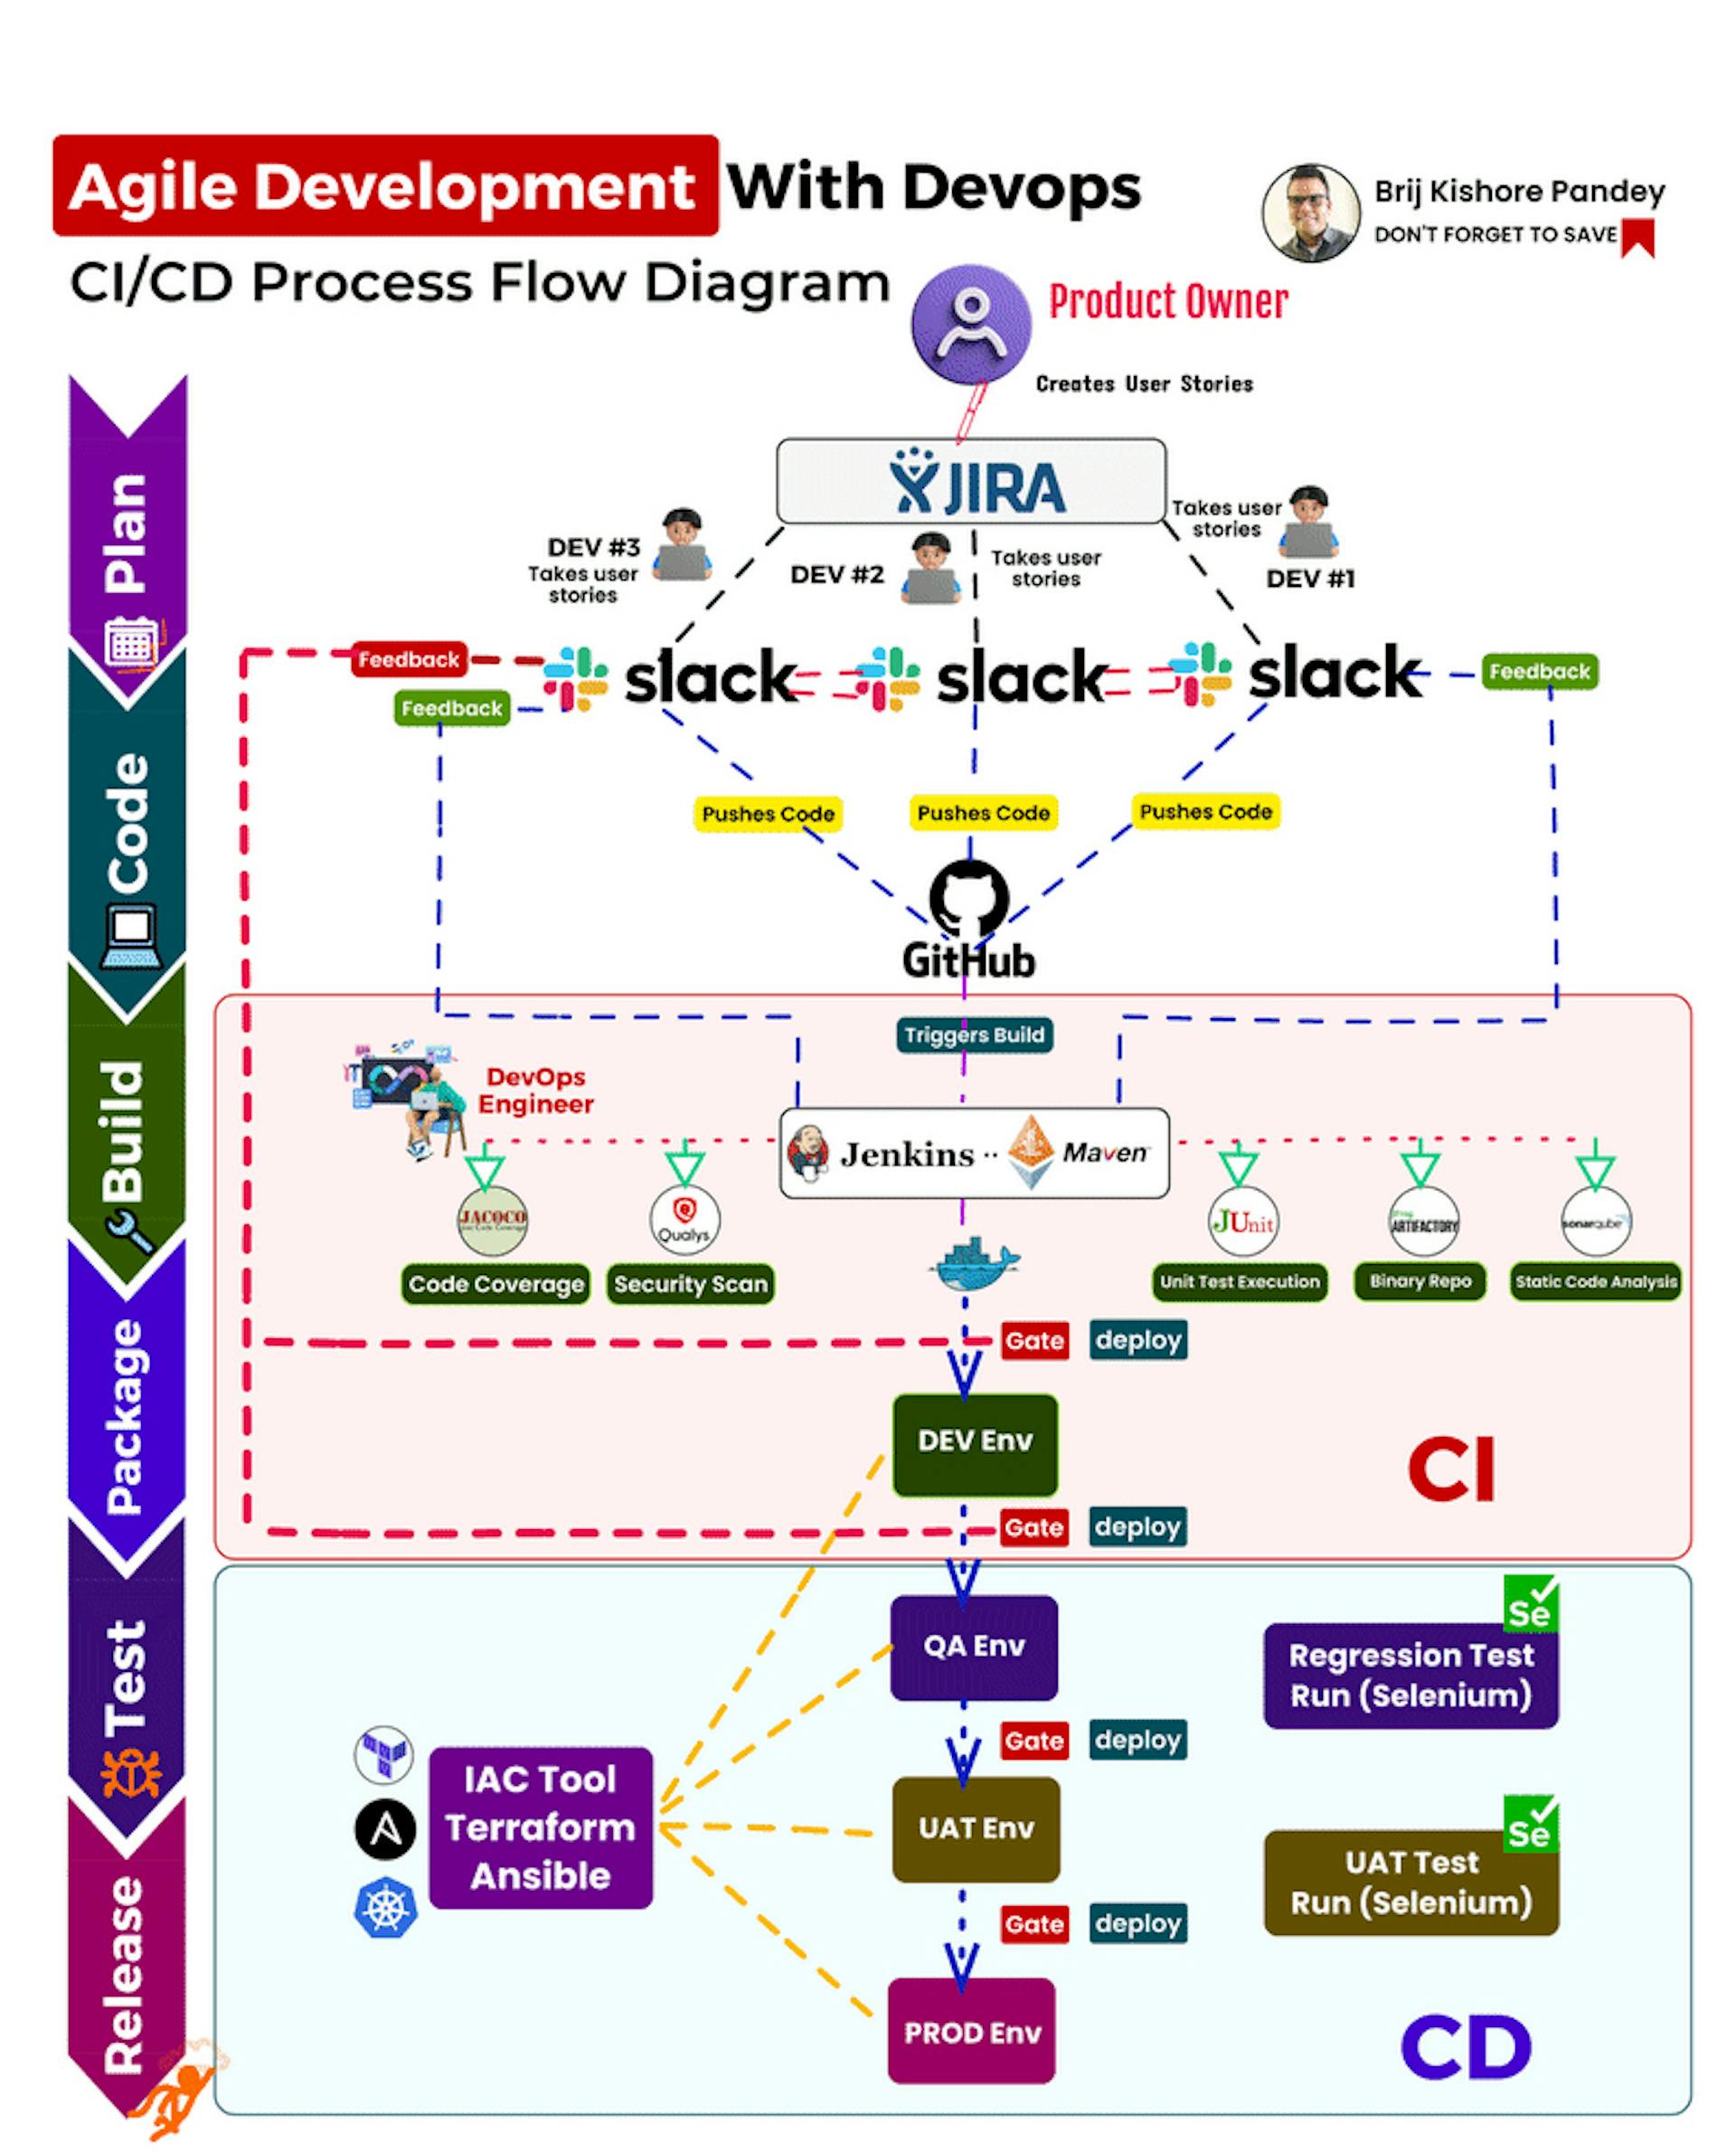                                            CI/CD Process/Pipeline. Source: https://www.devopsschool.com/blog/how-to-implement-ci-cd-in-your-agile-team/